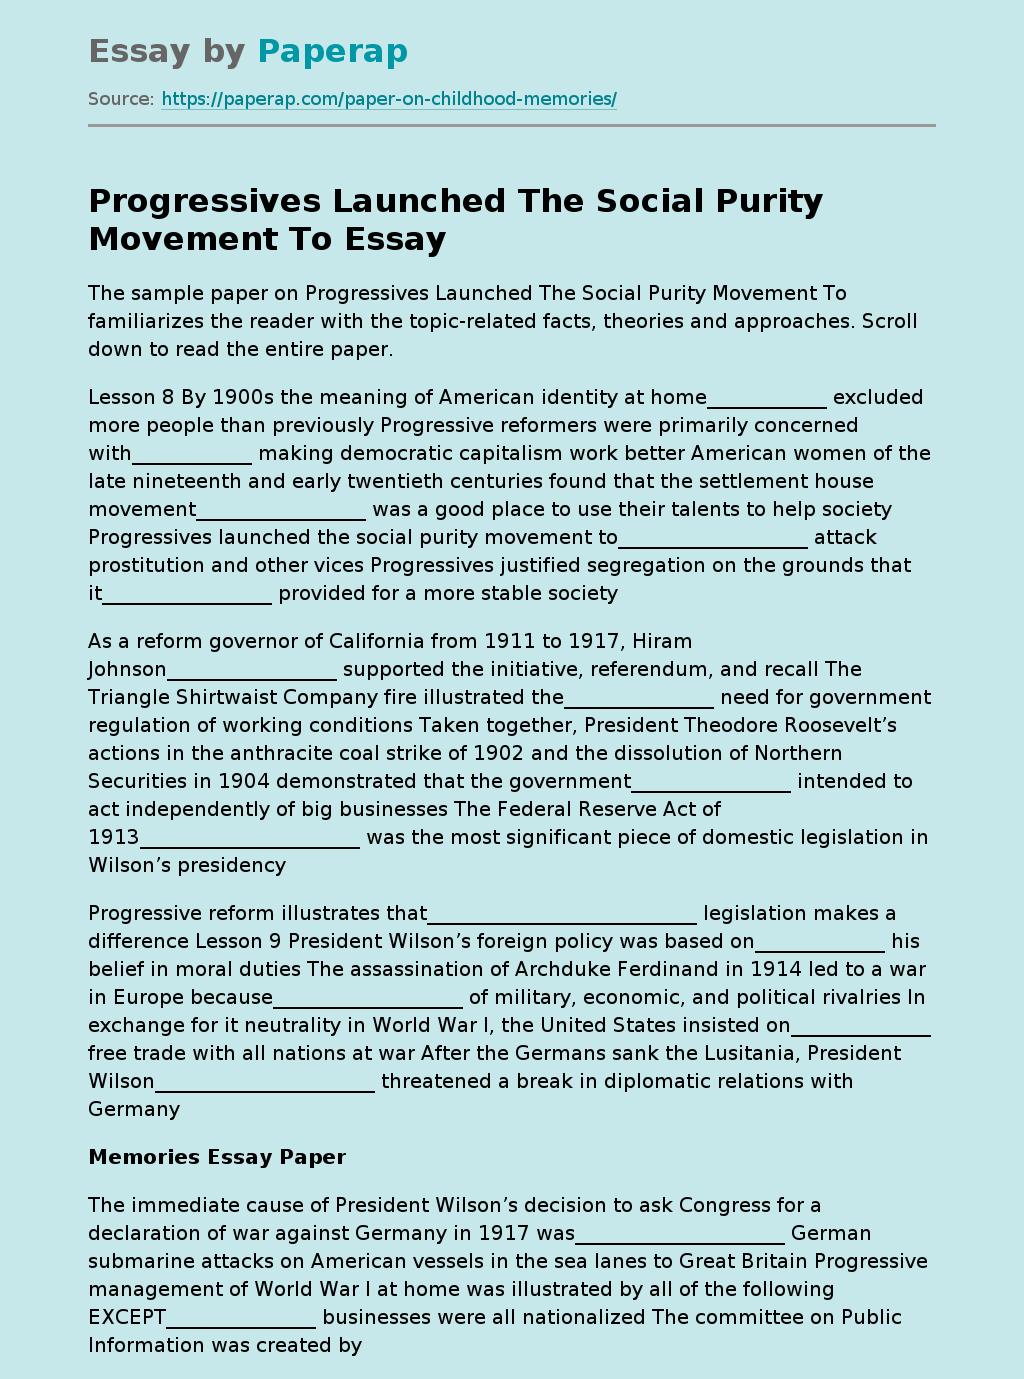 Progressives Launched The Social Purity Movement To